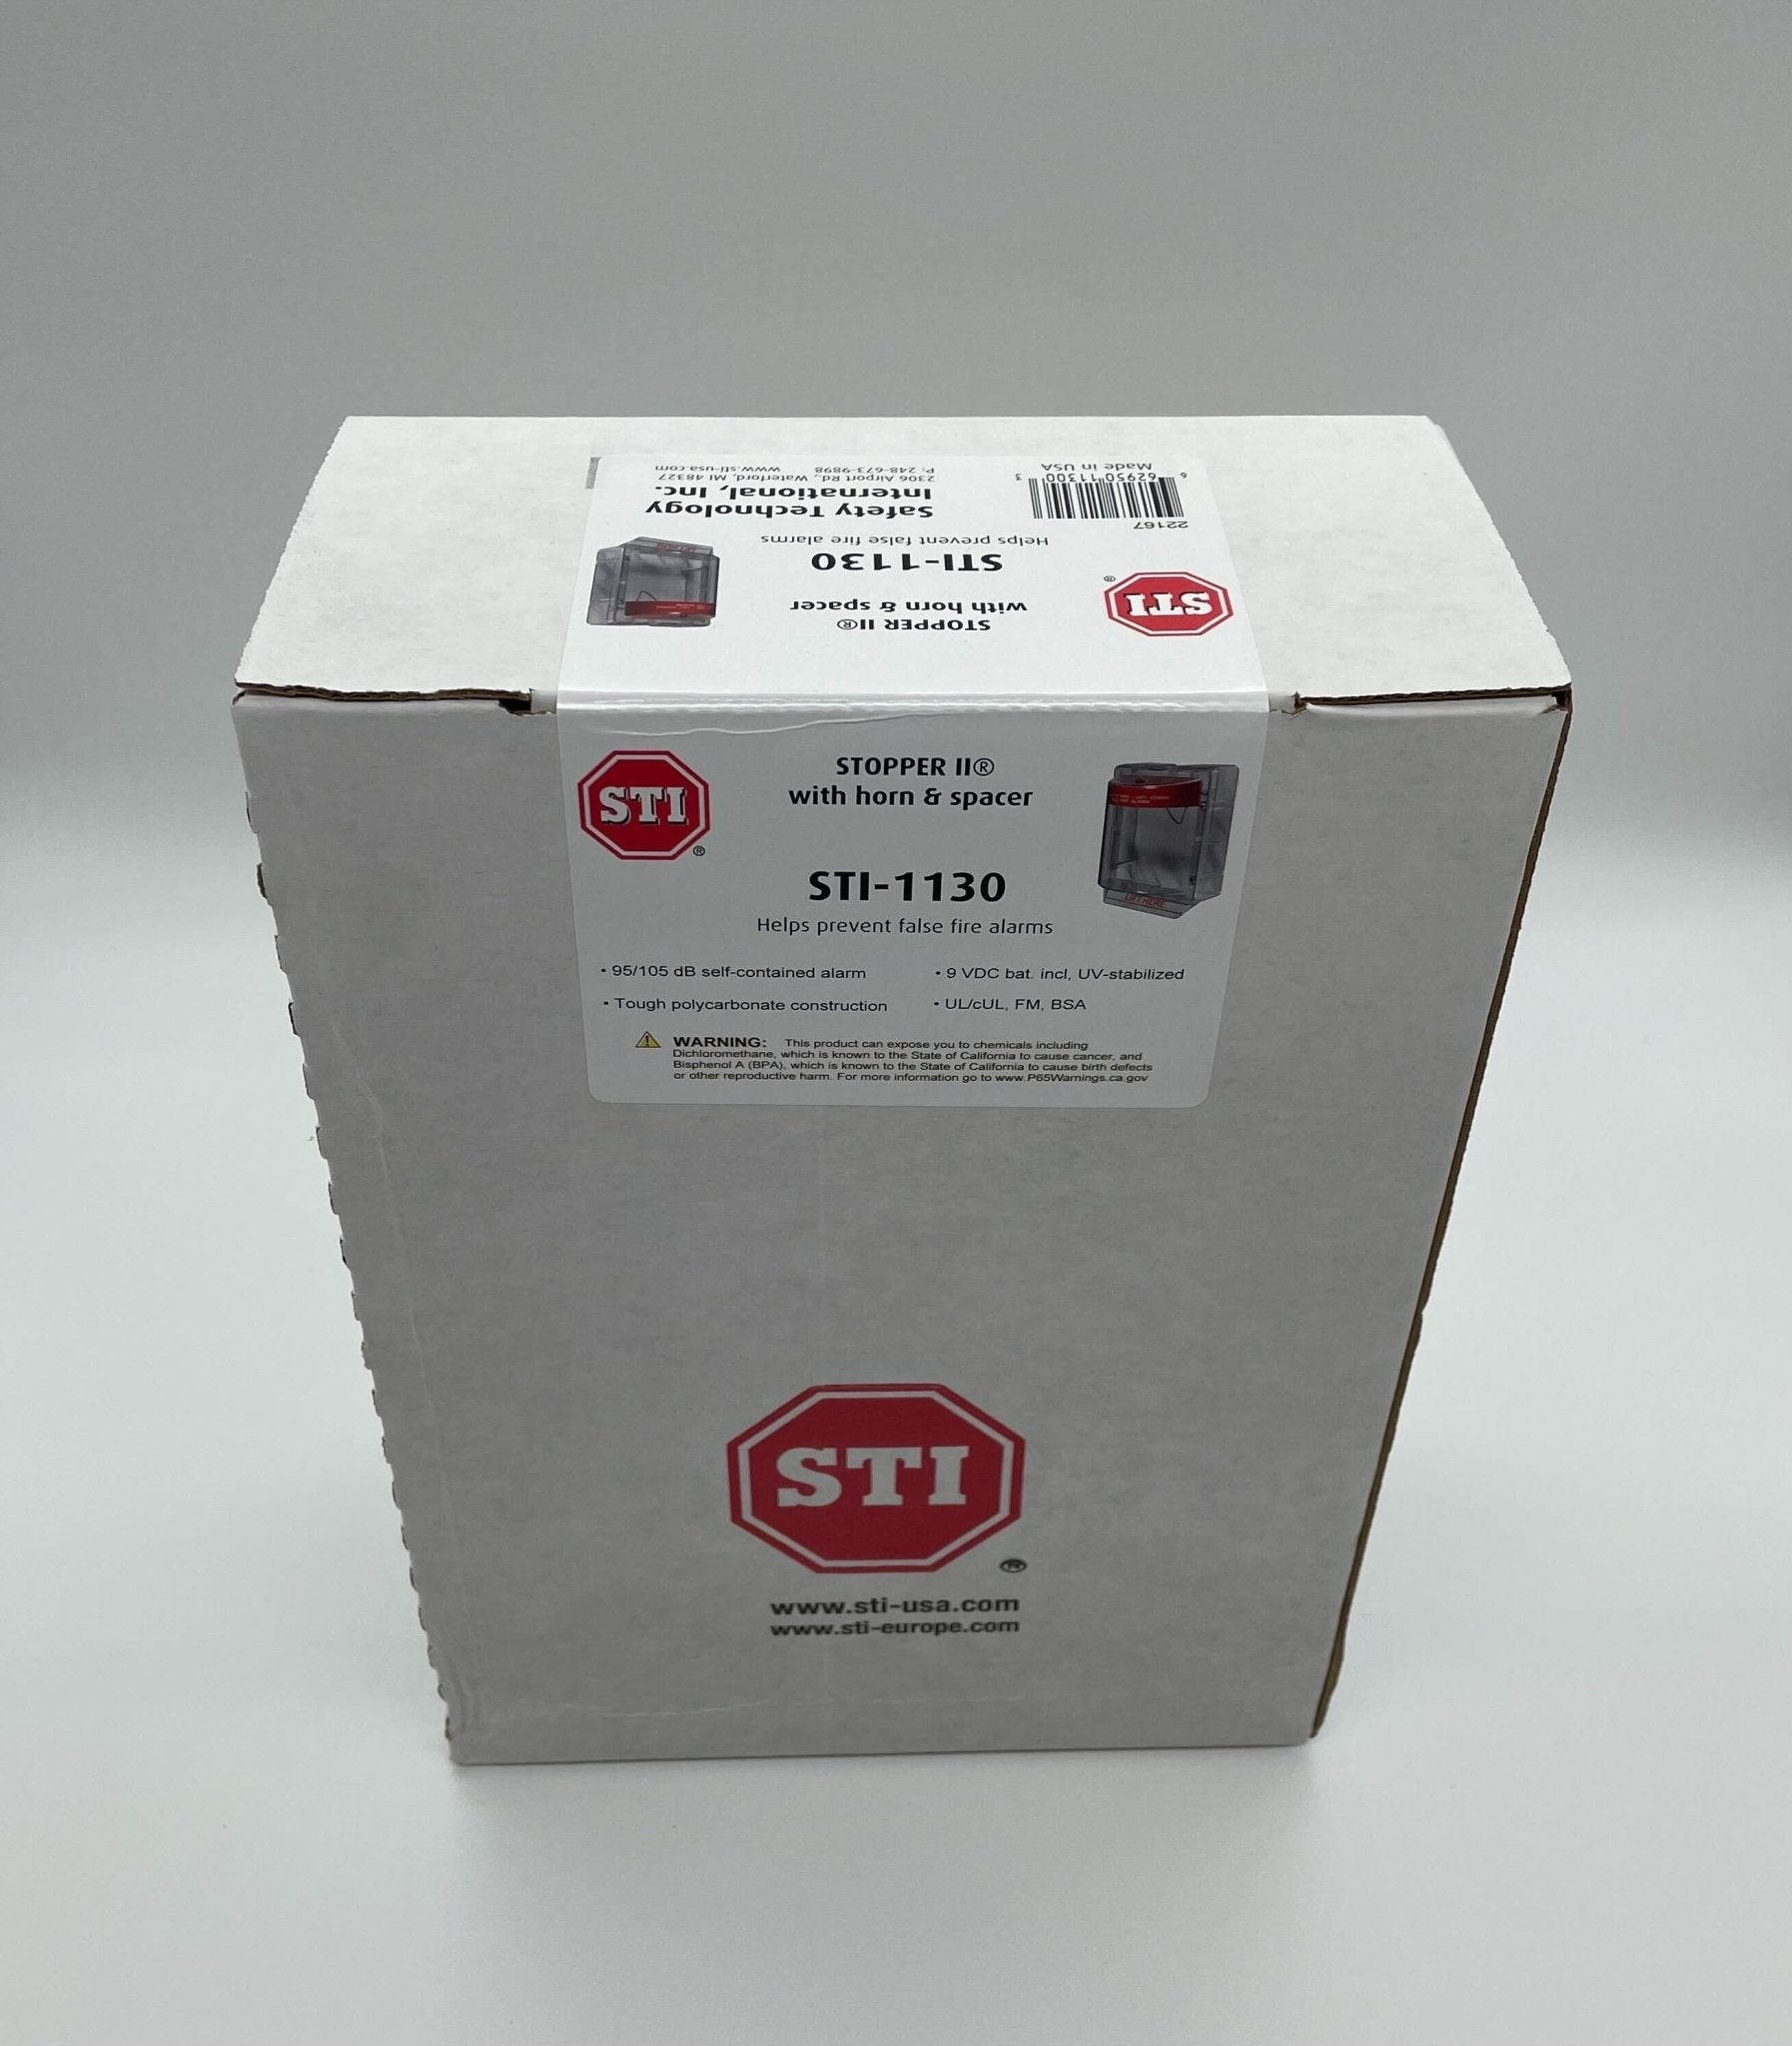 STI-1130 Stopper II with Horn and Clear Spacer, Fire Label - The Fire Alarm Supplier